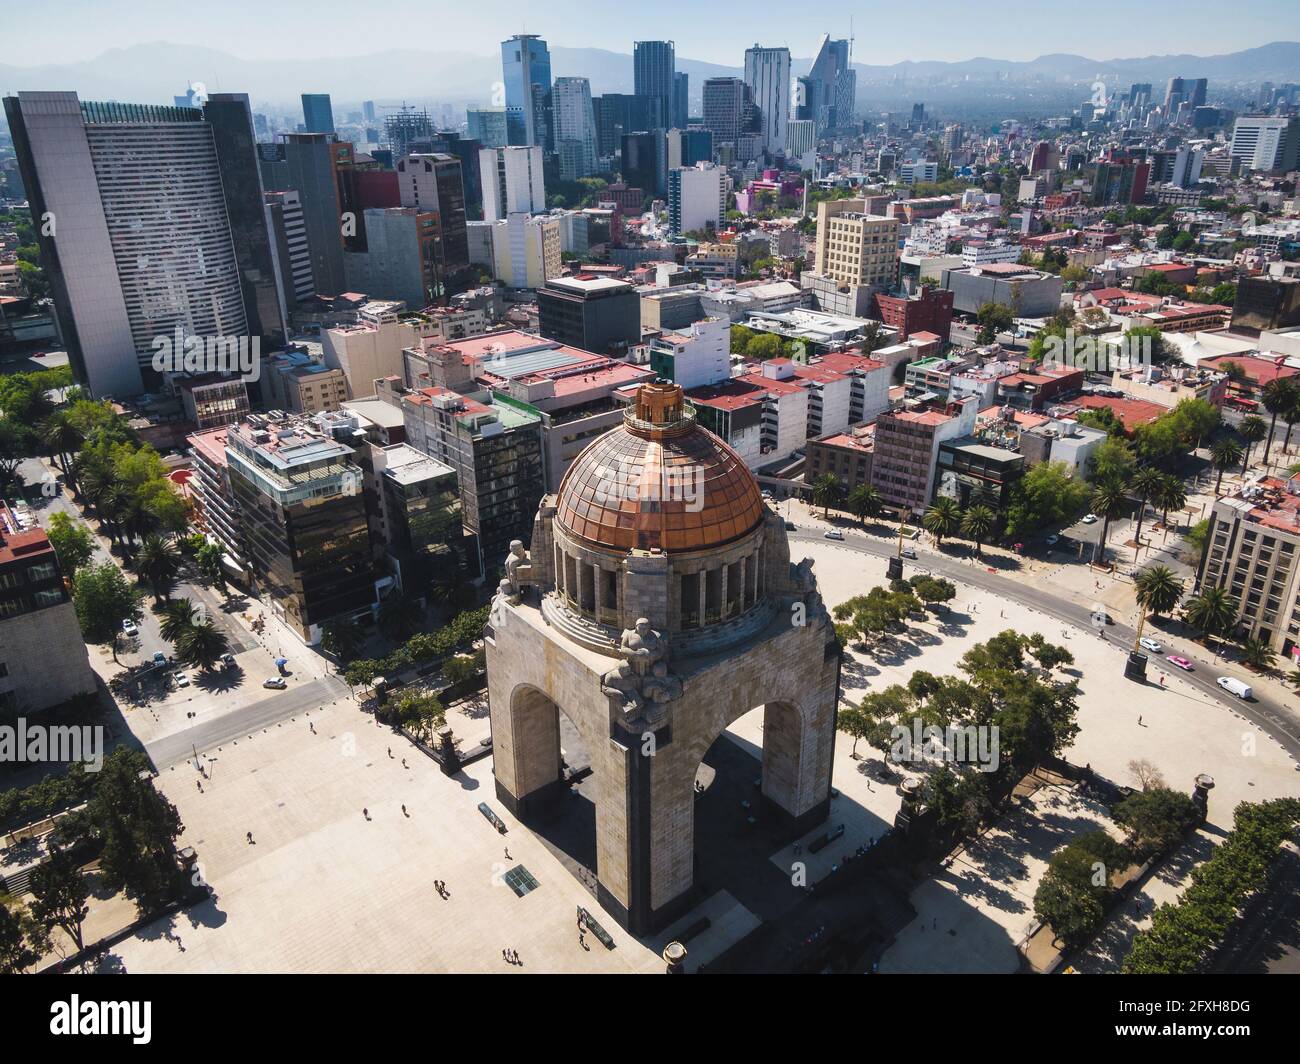 Daytime aerial view of historical landmark Monument to the Revolution located at Republic Square in Mexico City, Mexico. Stock Photo